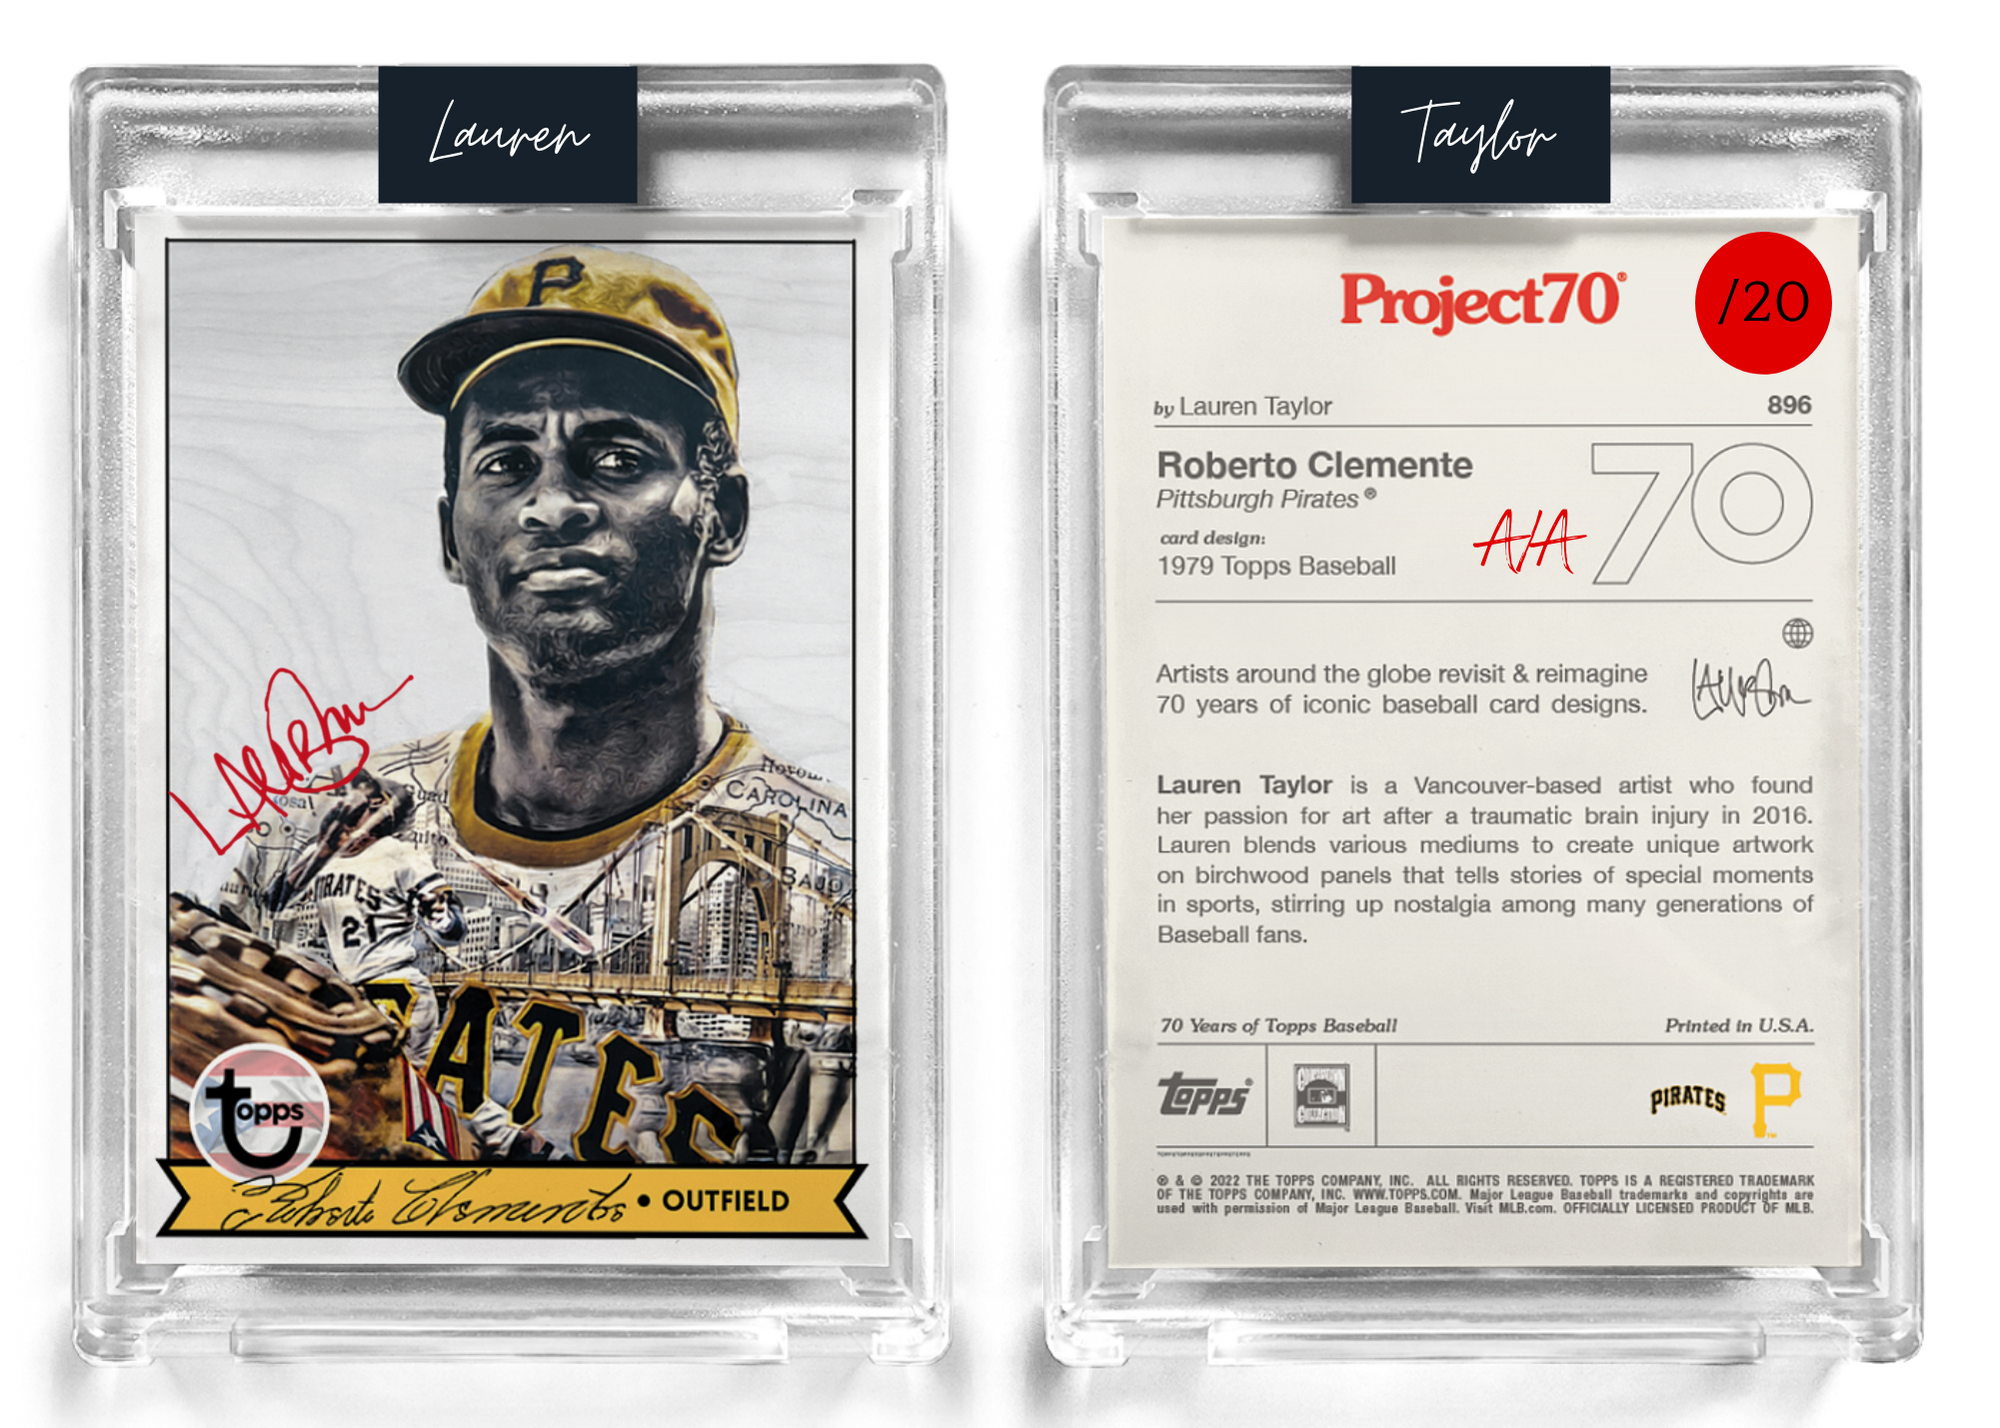 20 Red Artist Signature - Topps Project 70 130pt card #104 by Lauren